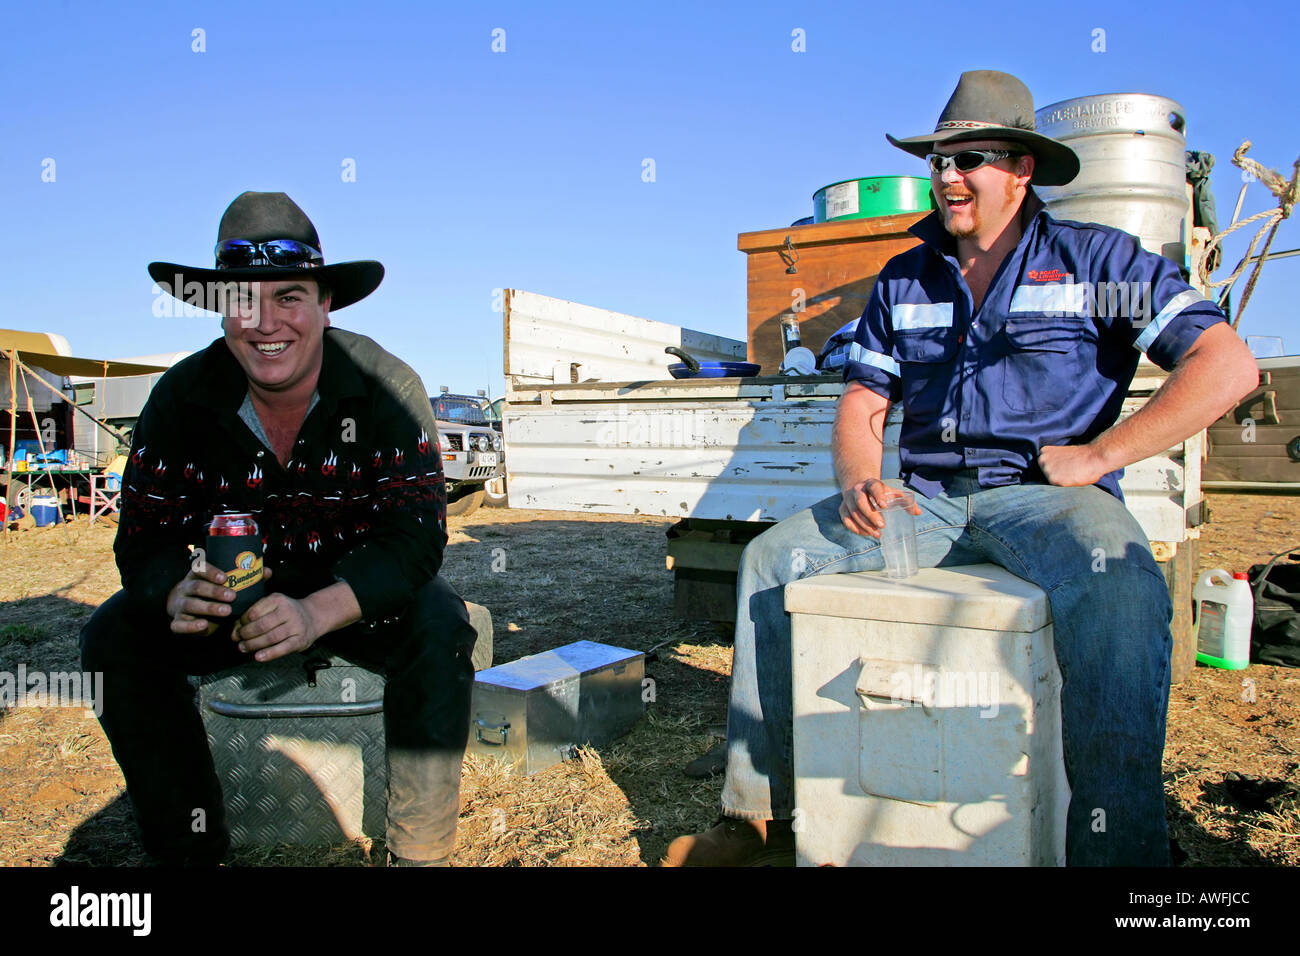 Australian youth at the campground, Mt Isa rodeo Stock Photo